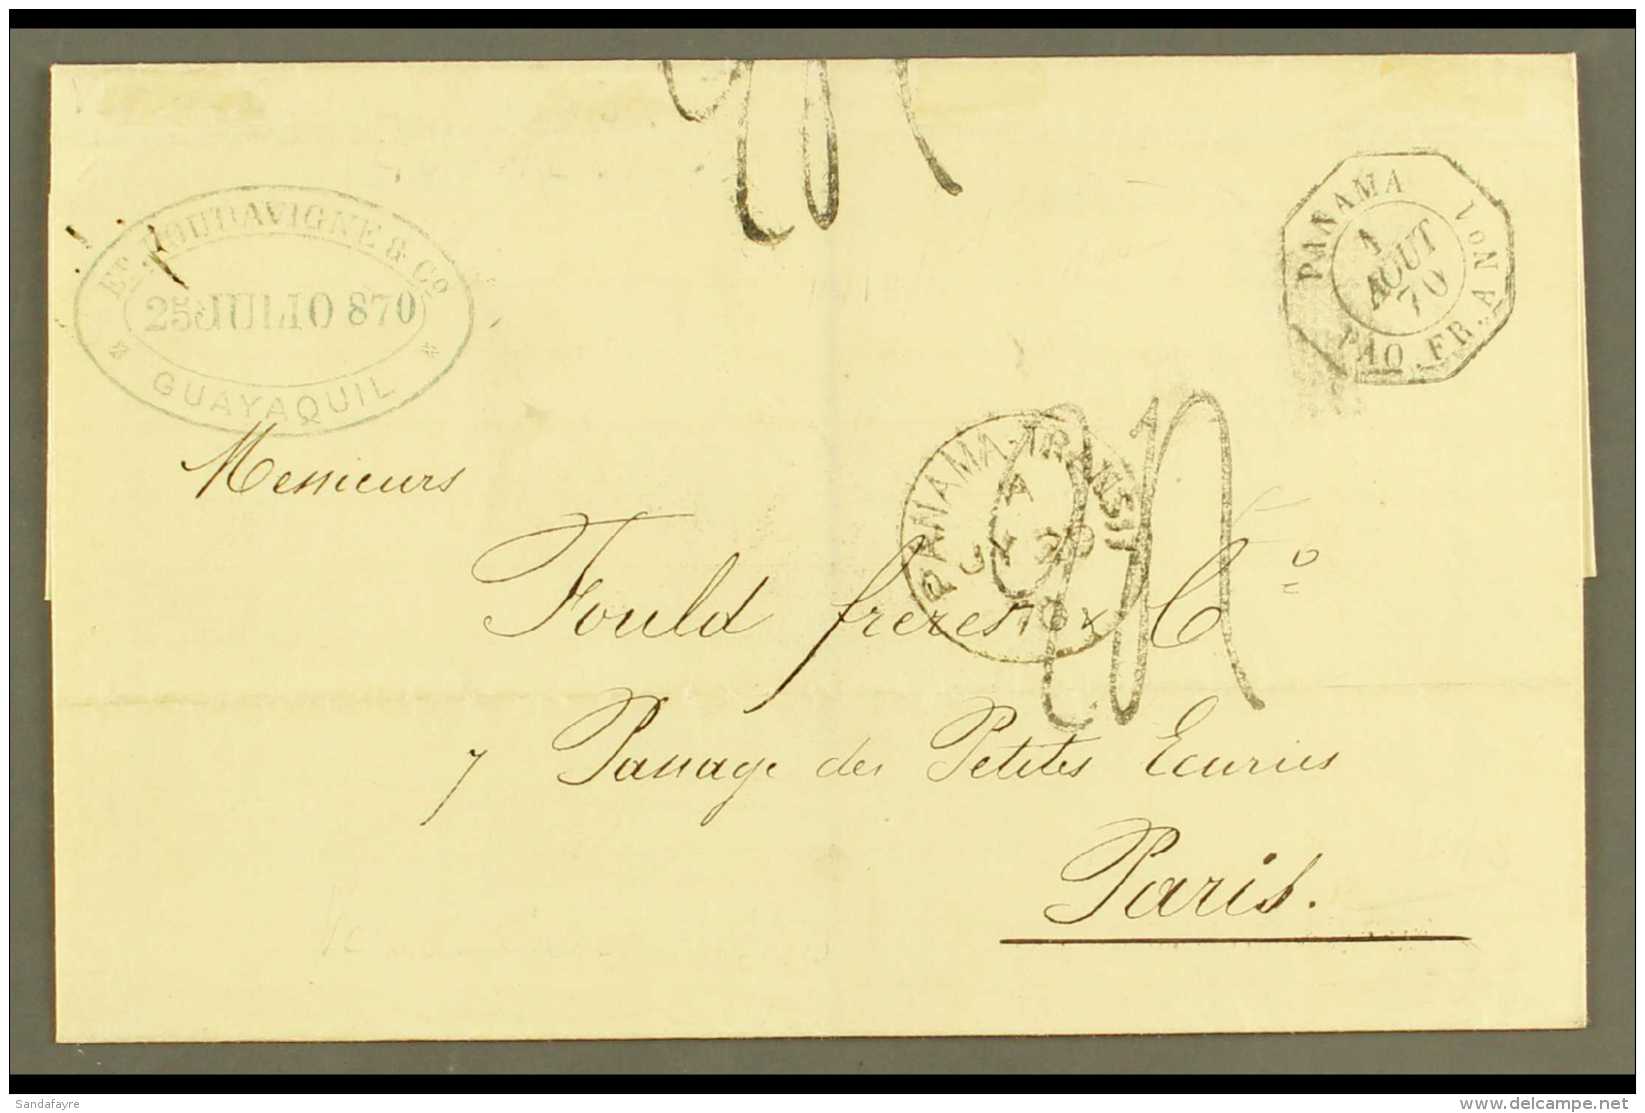 BRITISH PO's IN ECUADOR 1870 (July) Stampless Cover From Guayaquil To Paris Showing On The Back Very Fine... - Ecuador